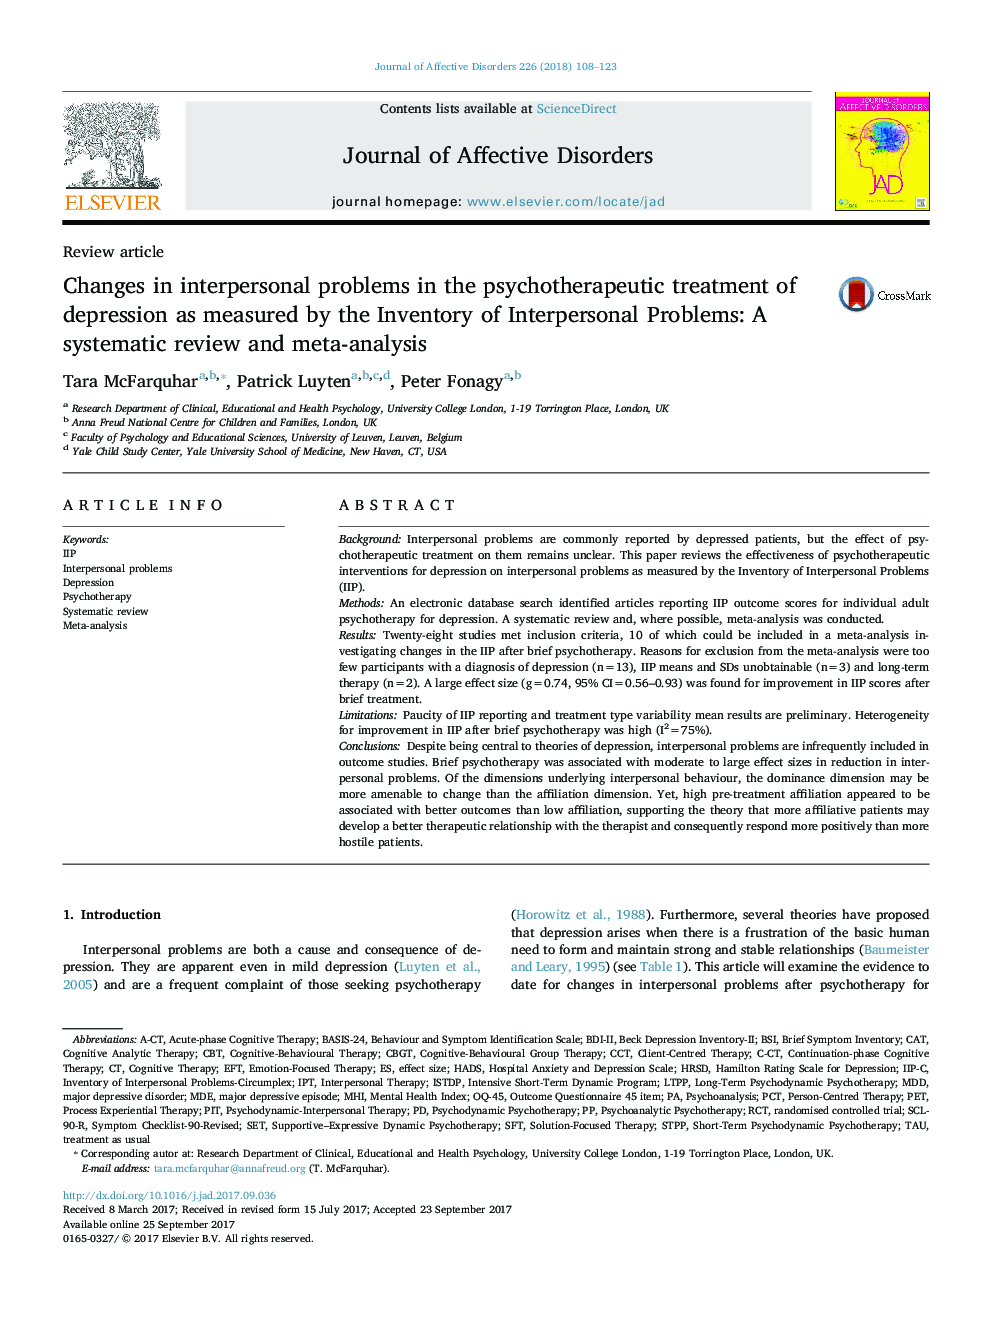 Review articleChanges in interpersonal problems in the psychotherapeutic treatment of depression as measured by the Inventory of Interpersonal Problems: A systematic review and meta-analysis